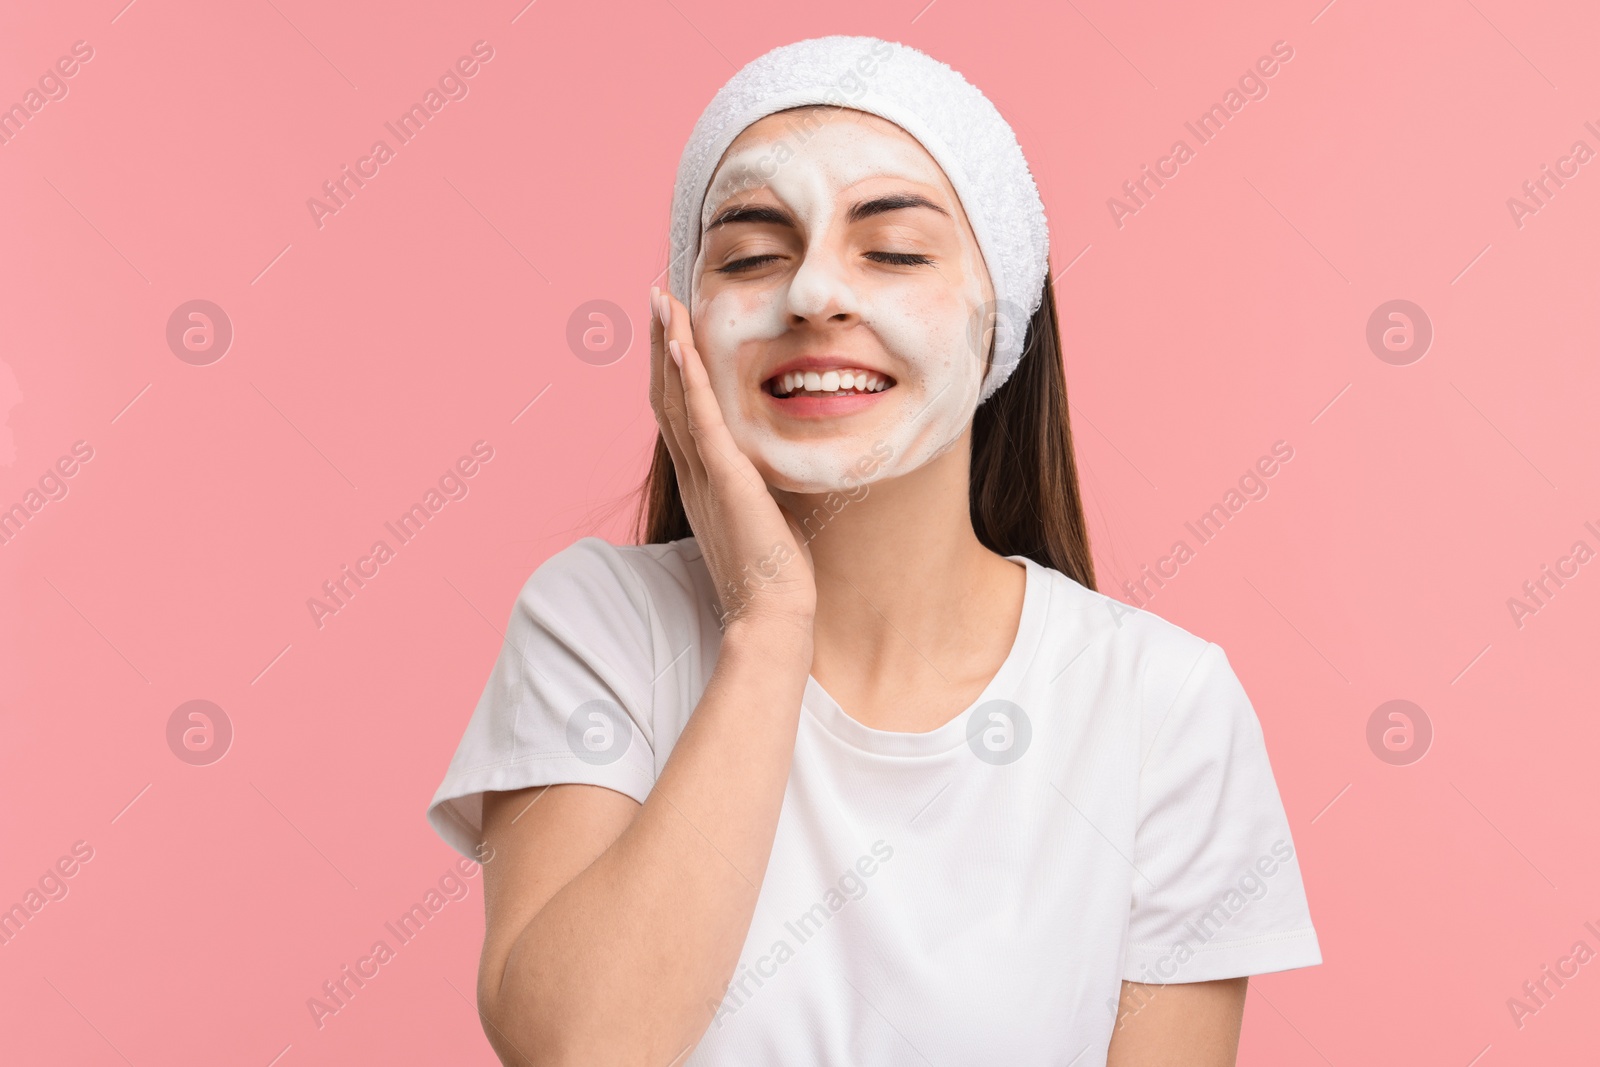 Photo of Young woman with headband washing her face on pink background